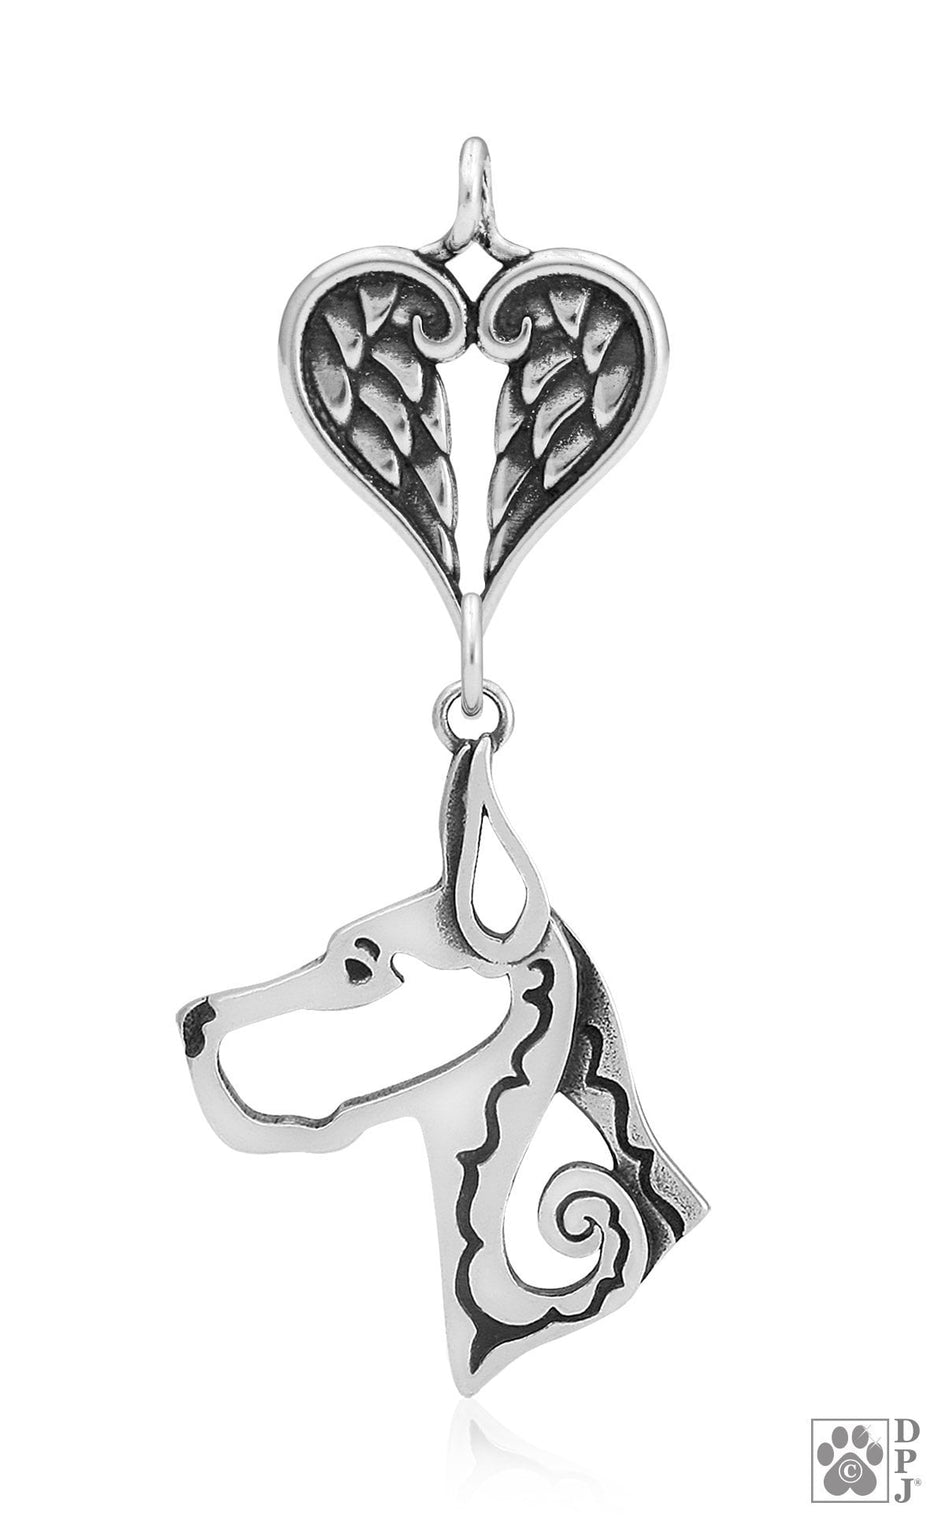 Great Dane, Cropped Ears, Head, with Engravable Healing Angels Pendant